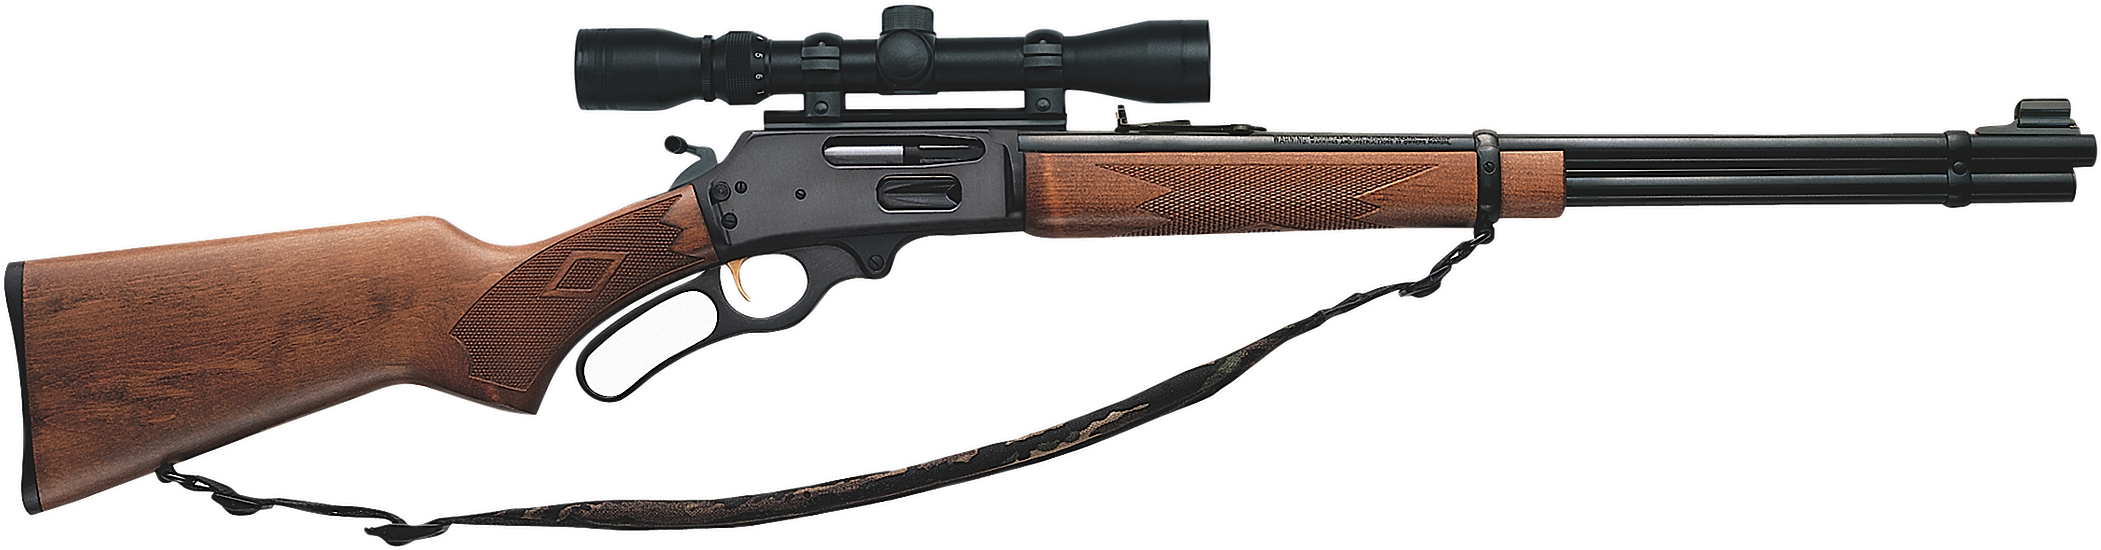 41649 - Rifle 30 30 Marlin (2135x578), Png Download